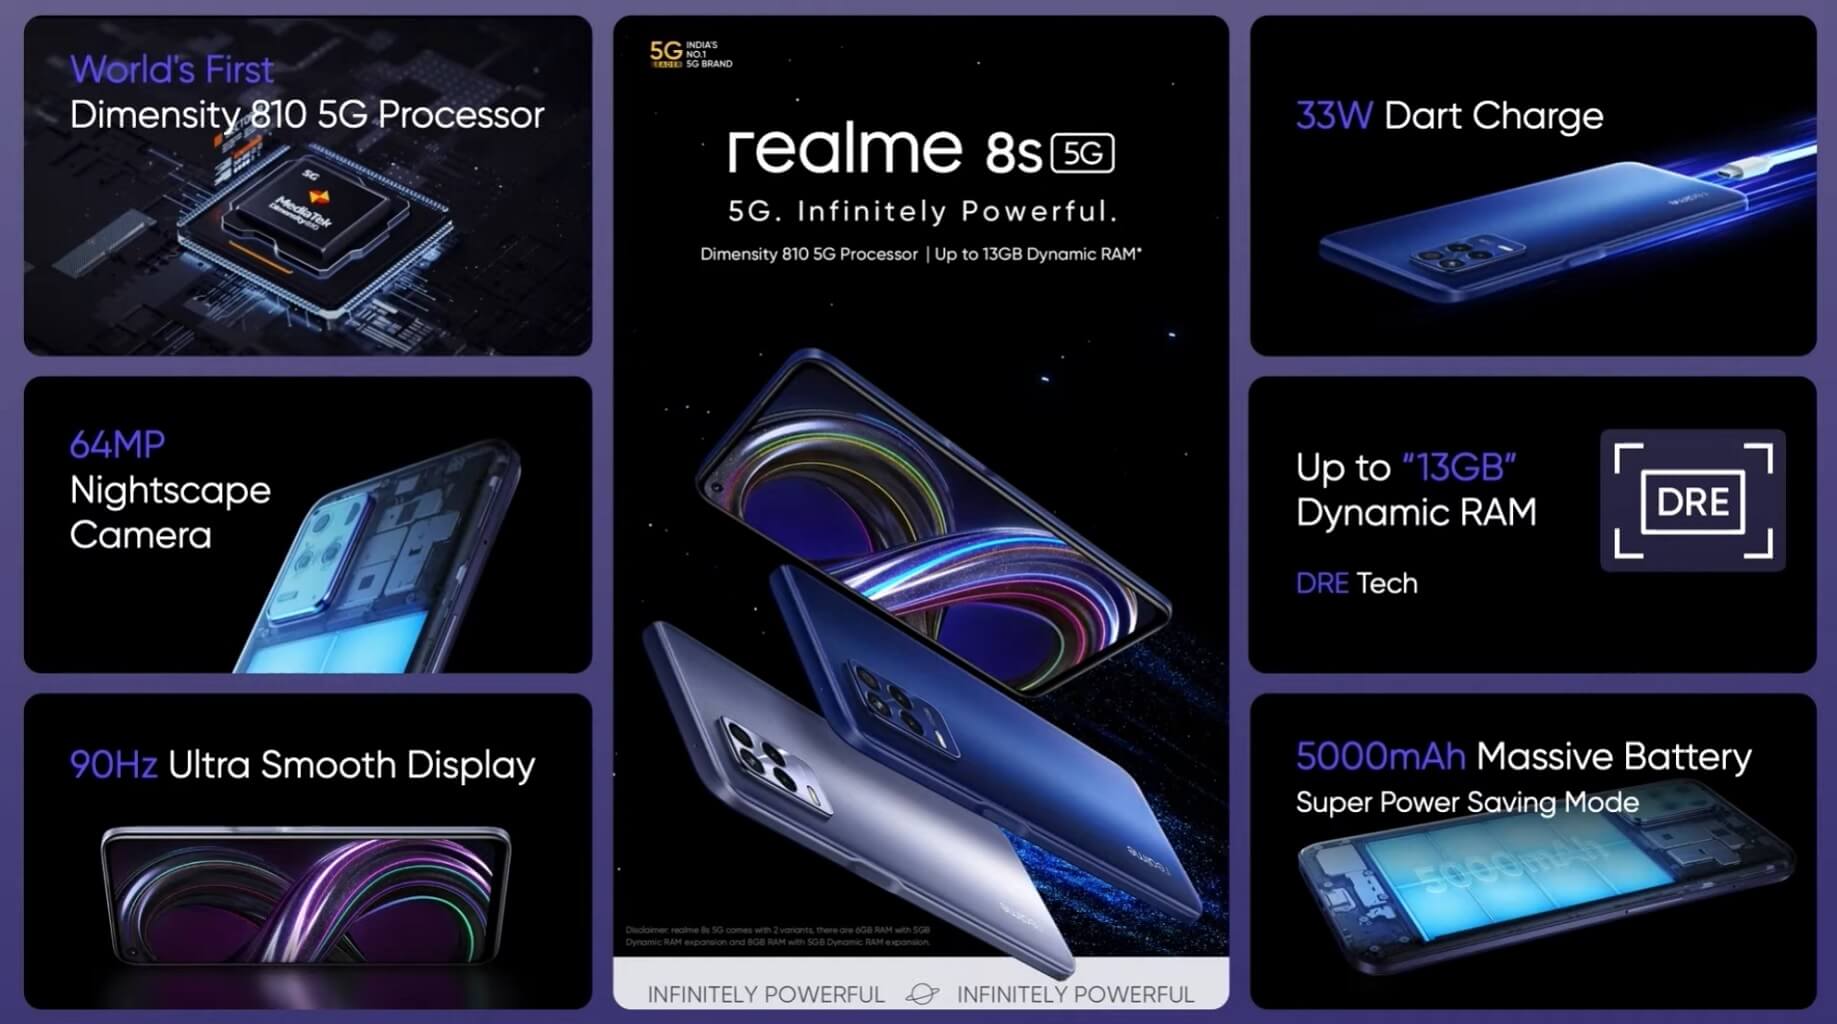 Realme 8s 5G features